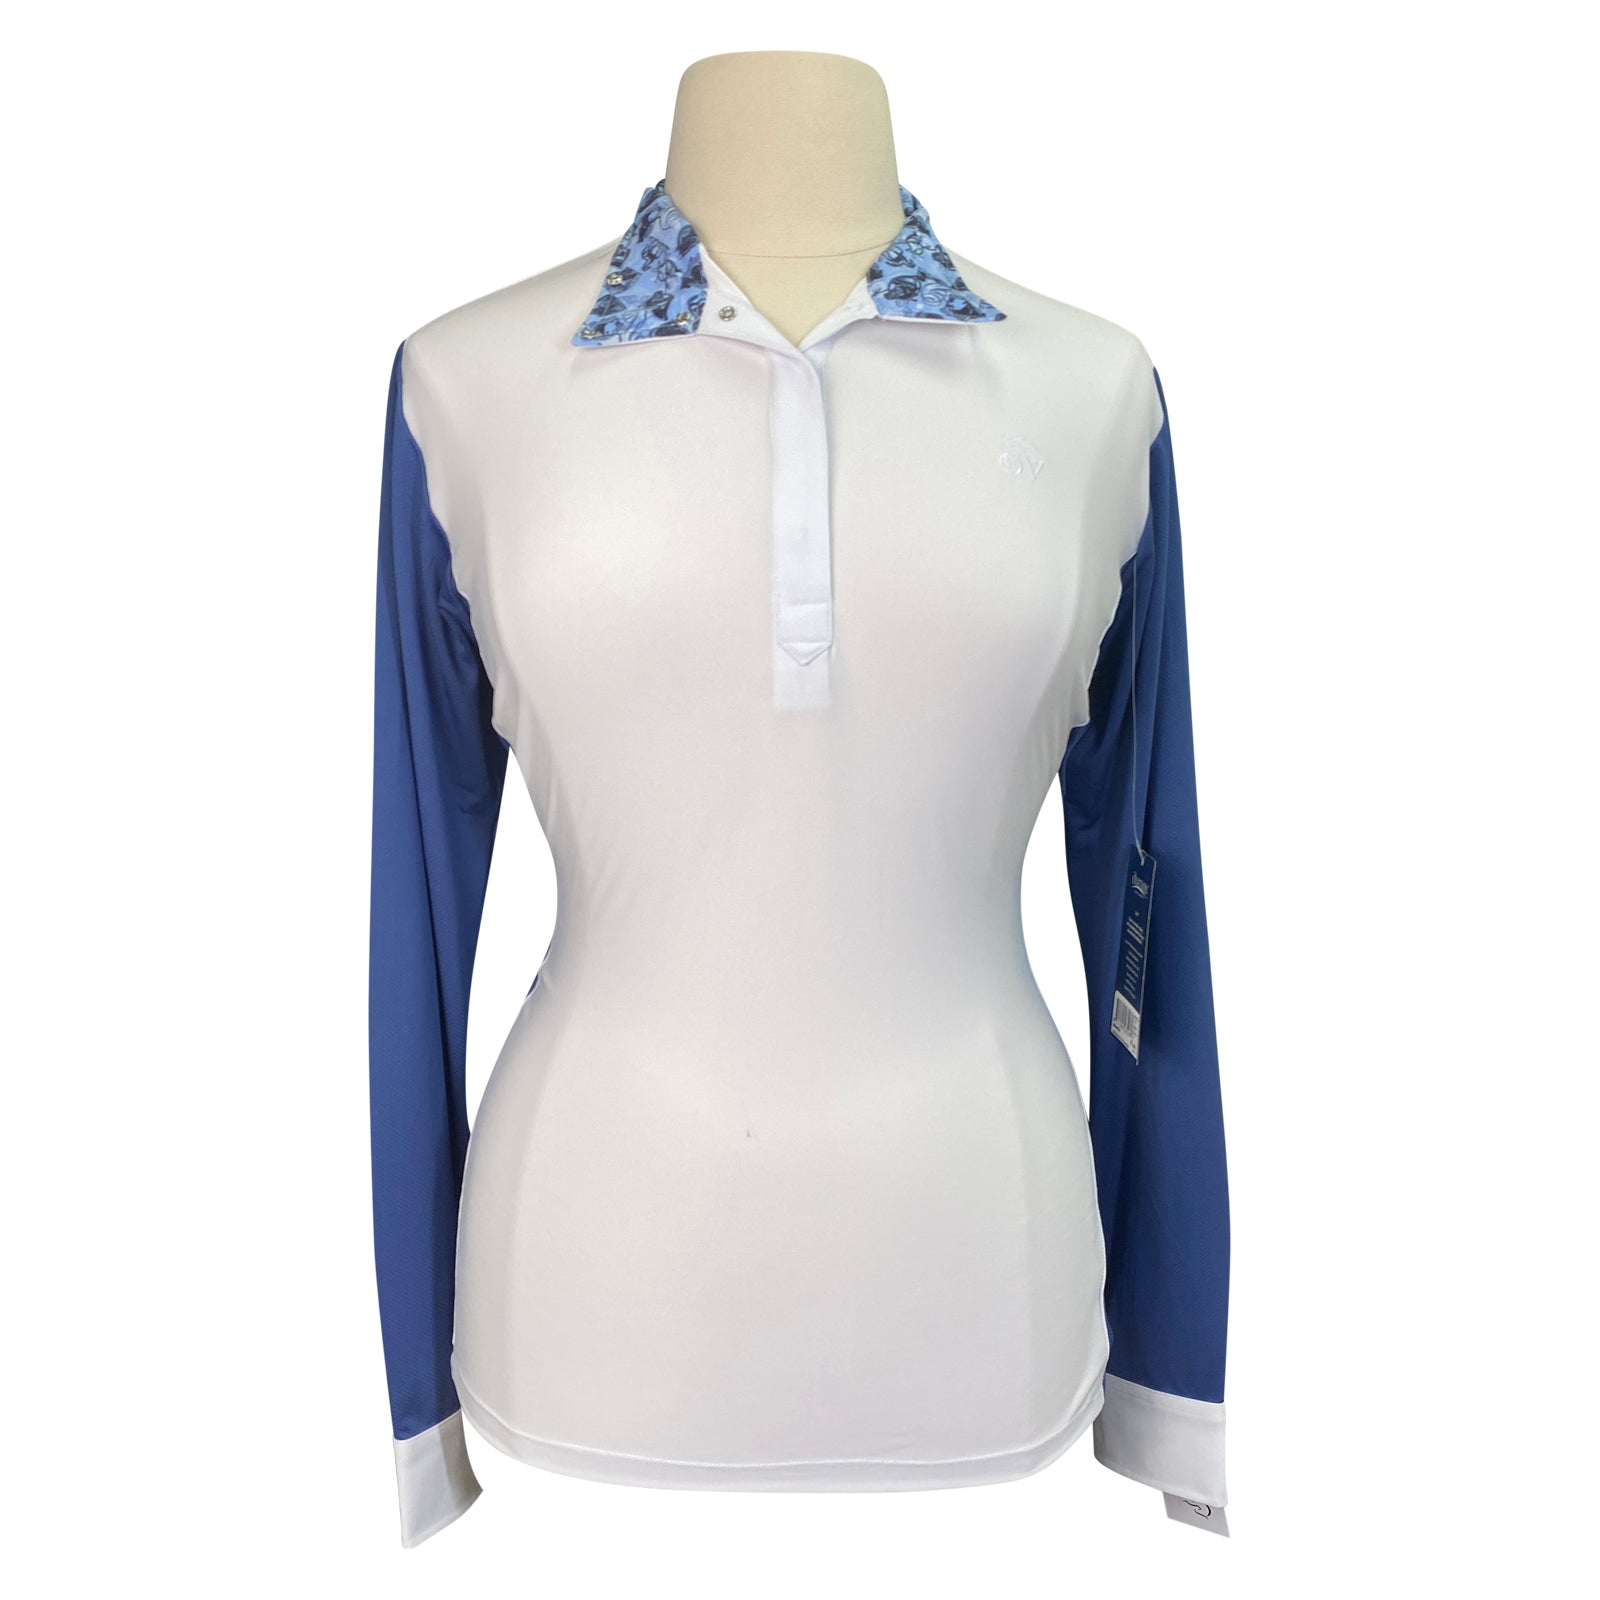 Ovation 'Belmont' Show Shirt in White/Blue